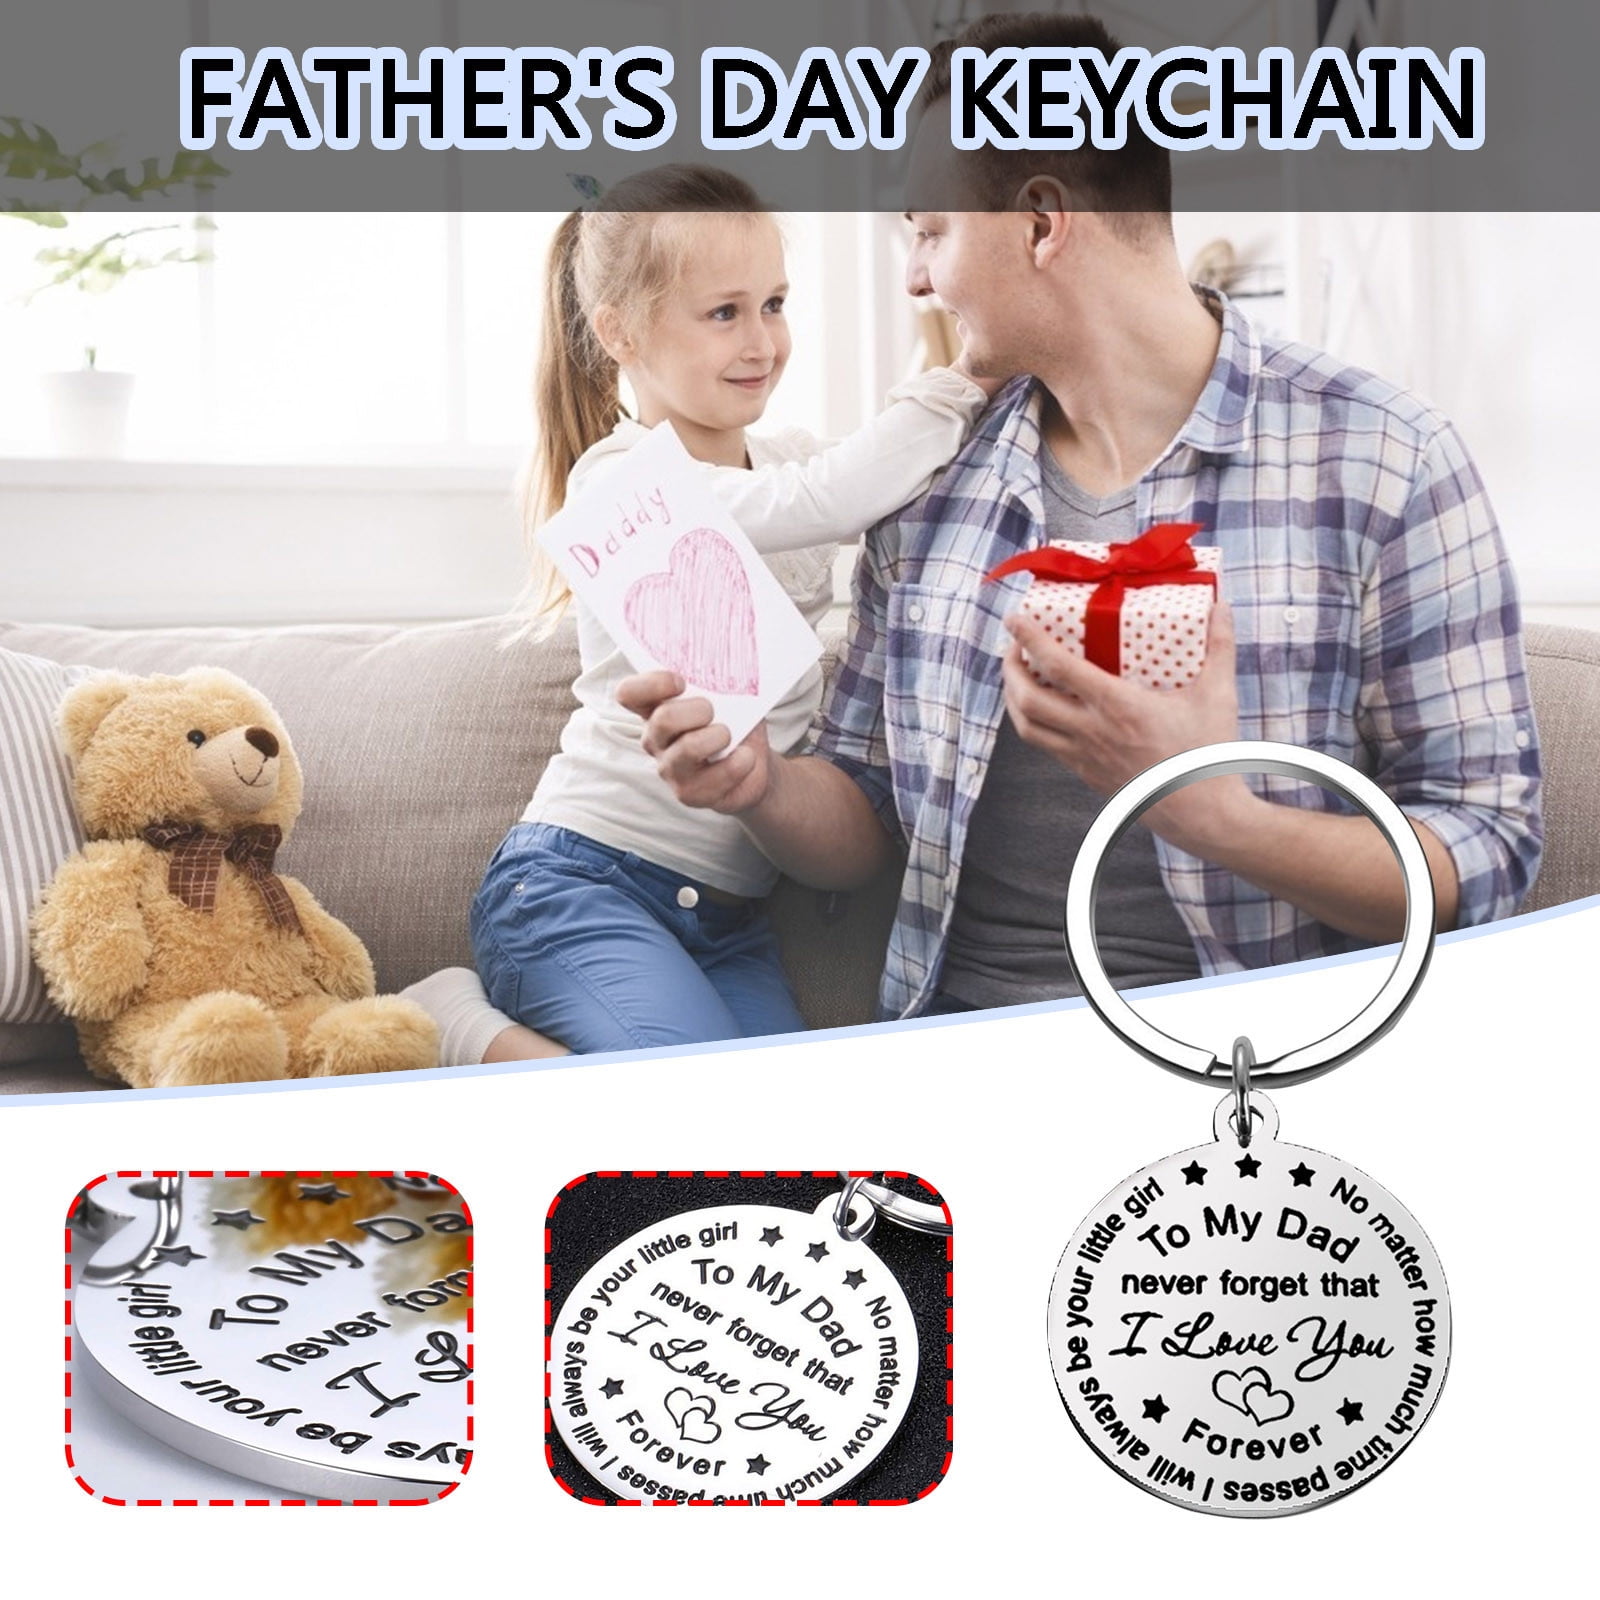 RnemiTe-amo Deals！Car keychain，To My DAD Father's Day Keychain A Stainless  Steel Keychain For Father 30mm 